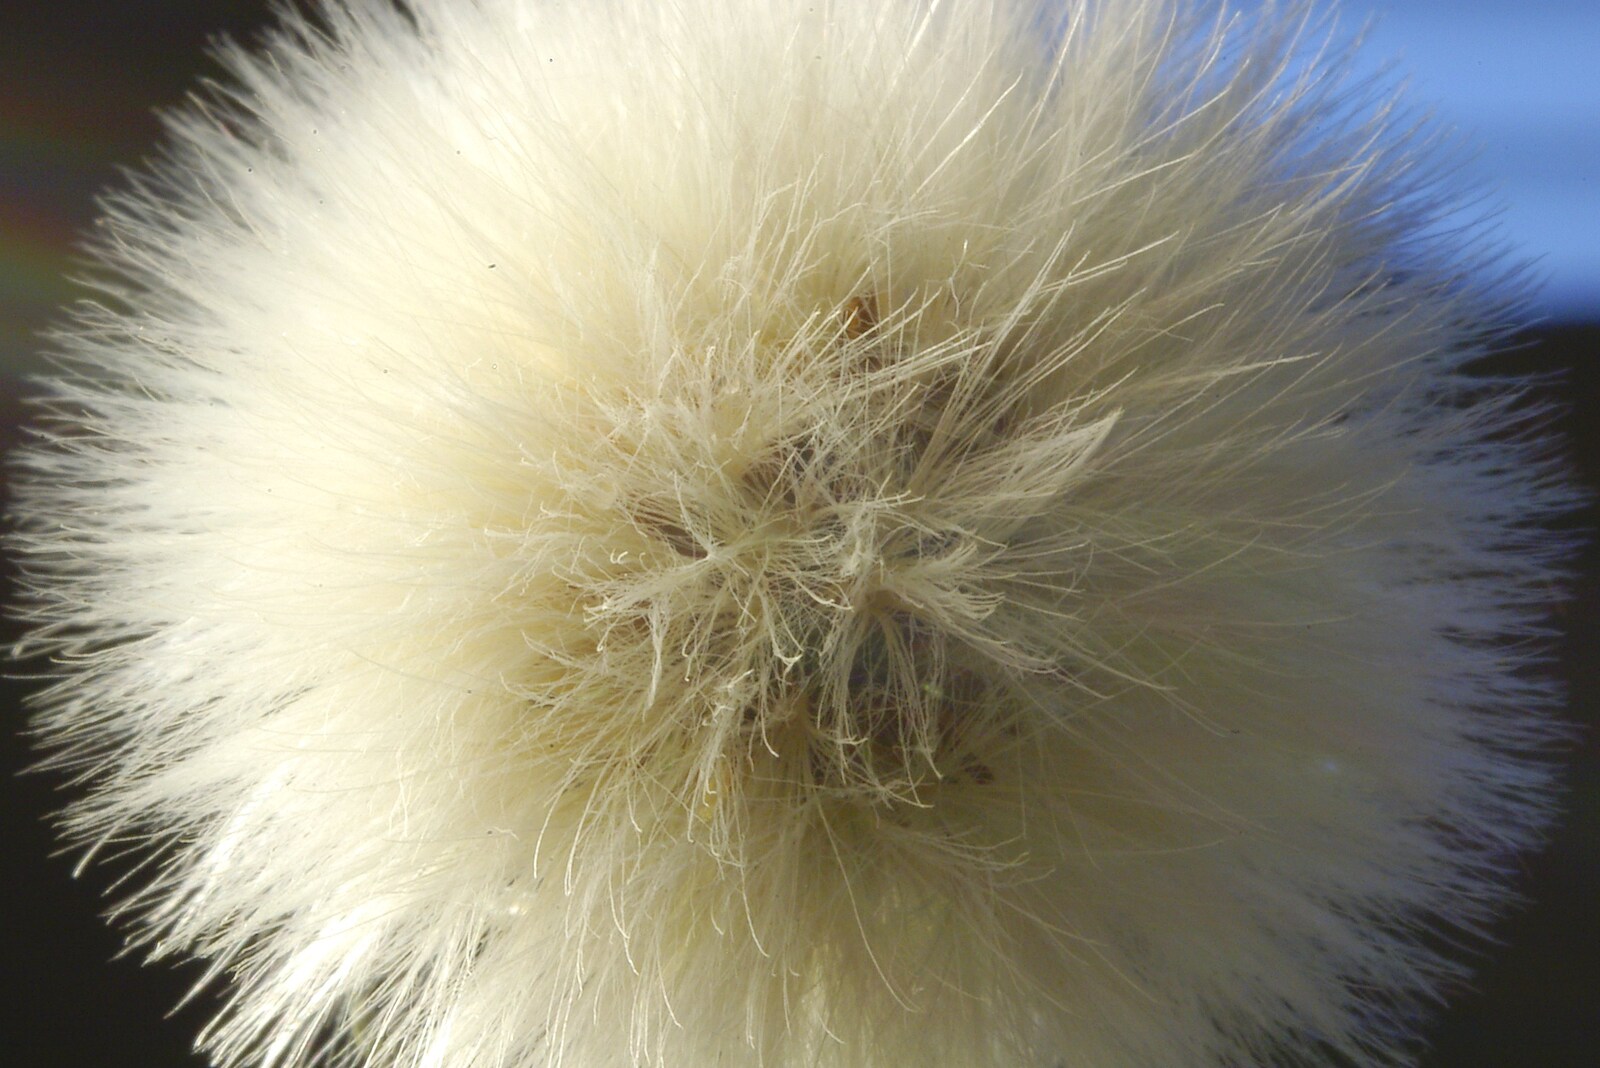 A dandelion seed from Fun With Bellows: Macro Photography, Brome, Suffolk - 13th May 2006